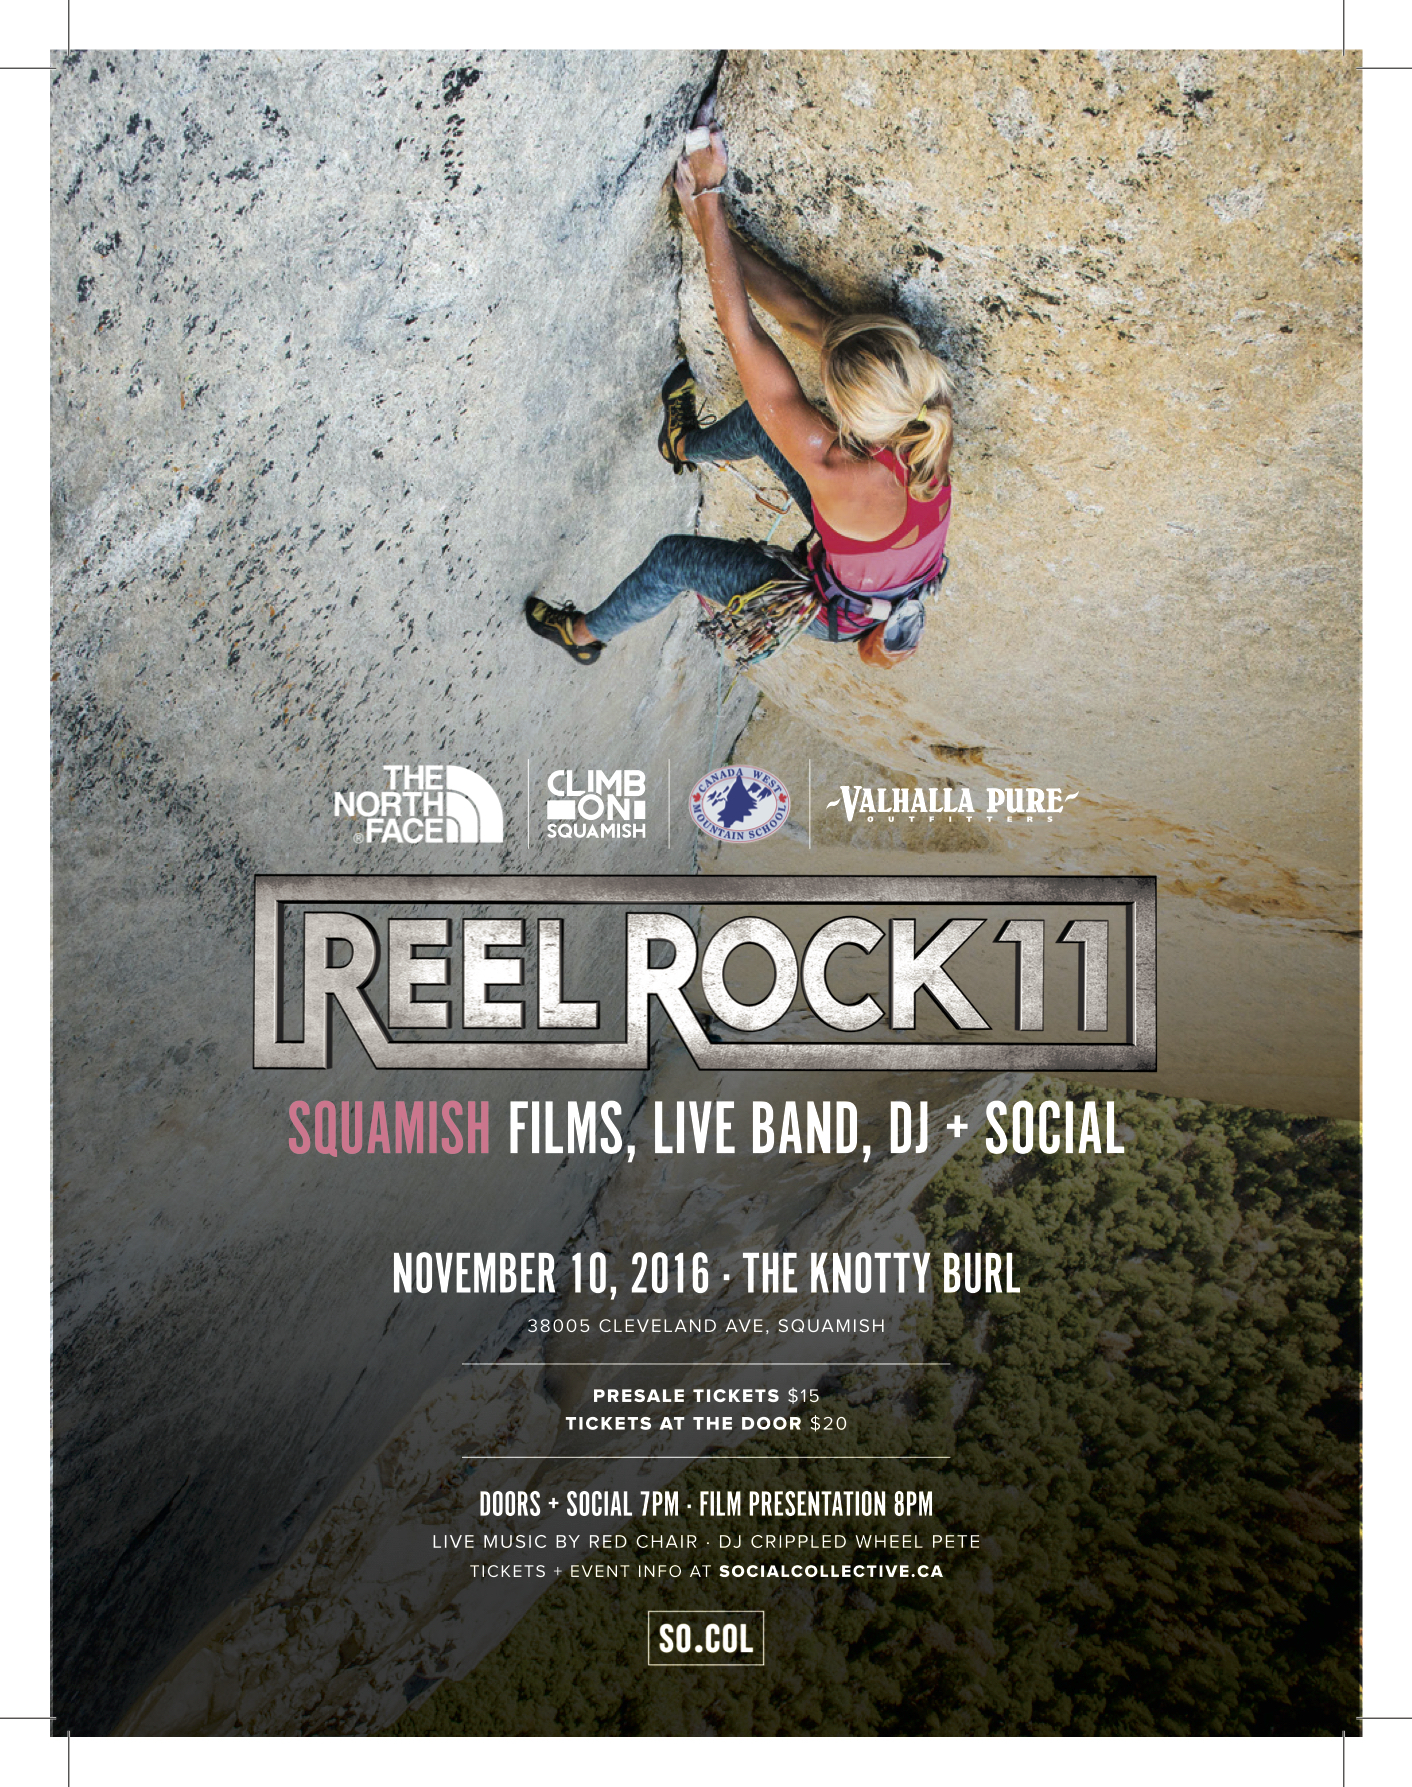 Reel Rock 11 Coming to Squamish